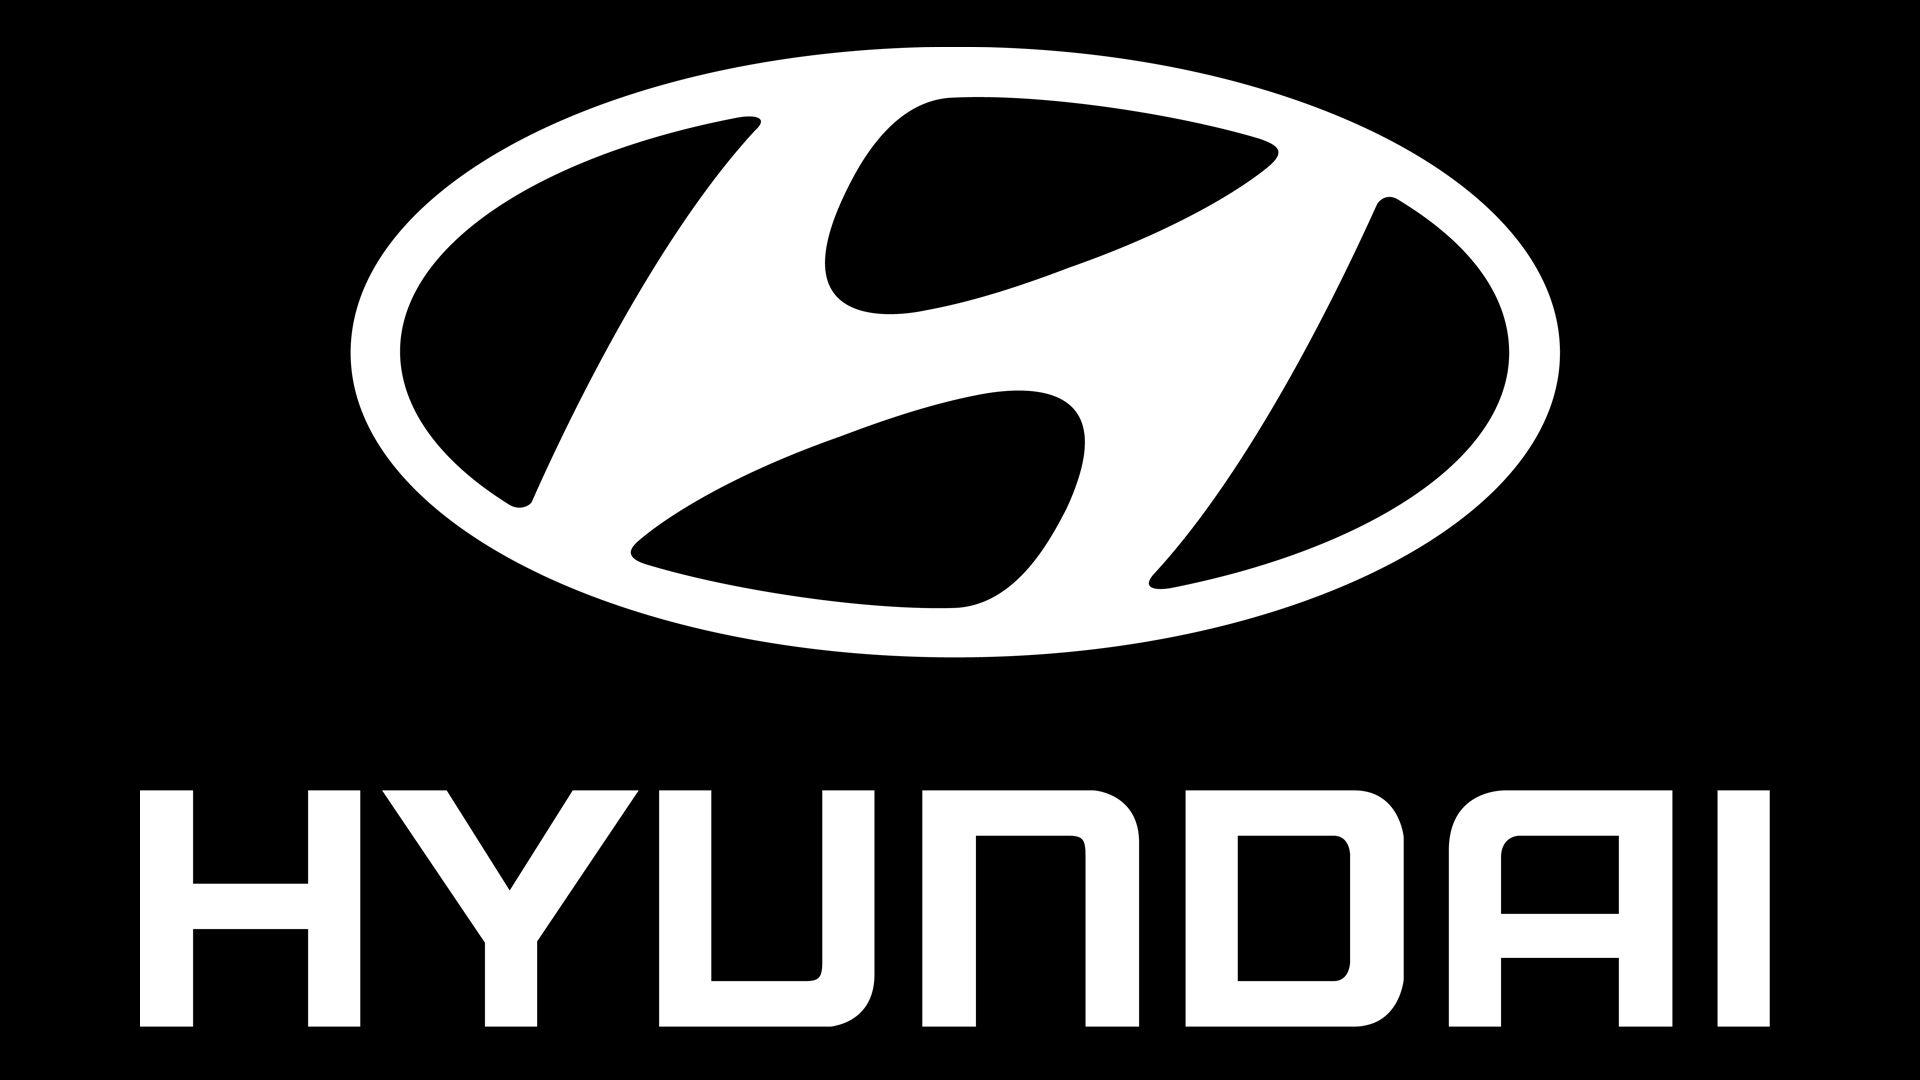 Hyundai Logo - Hyundai logo: about meaning, history and new changes in official emblem